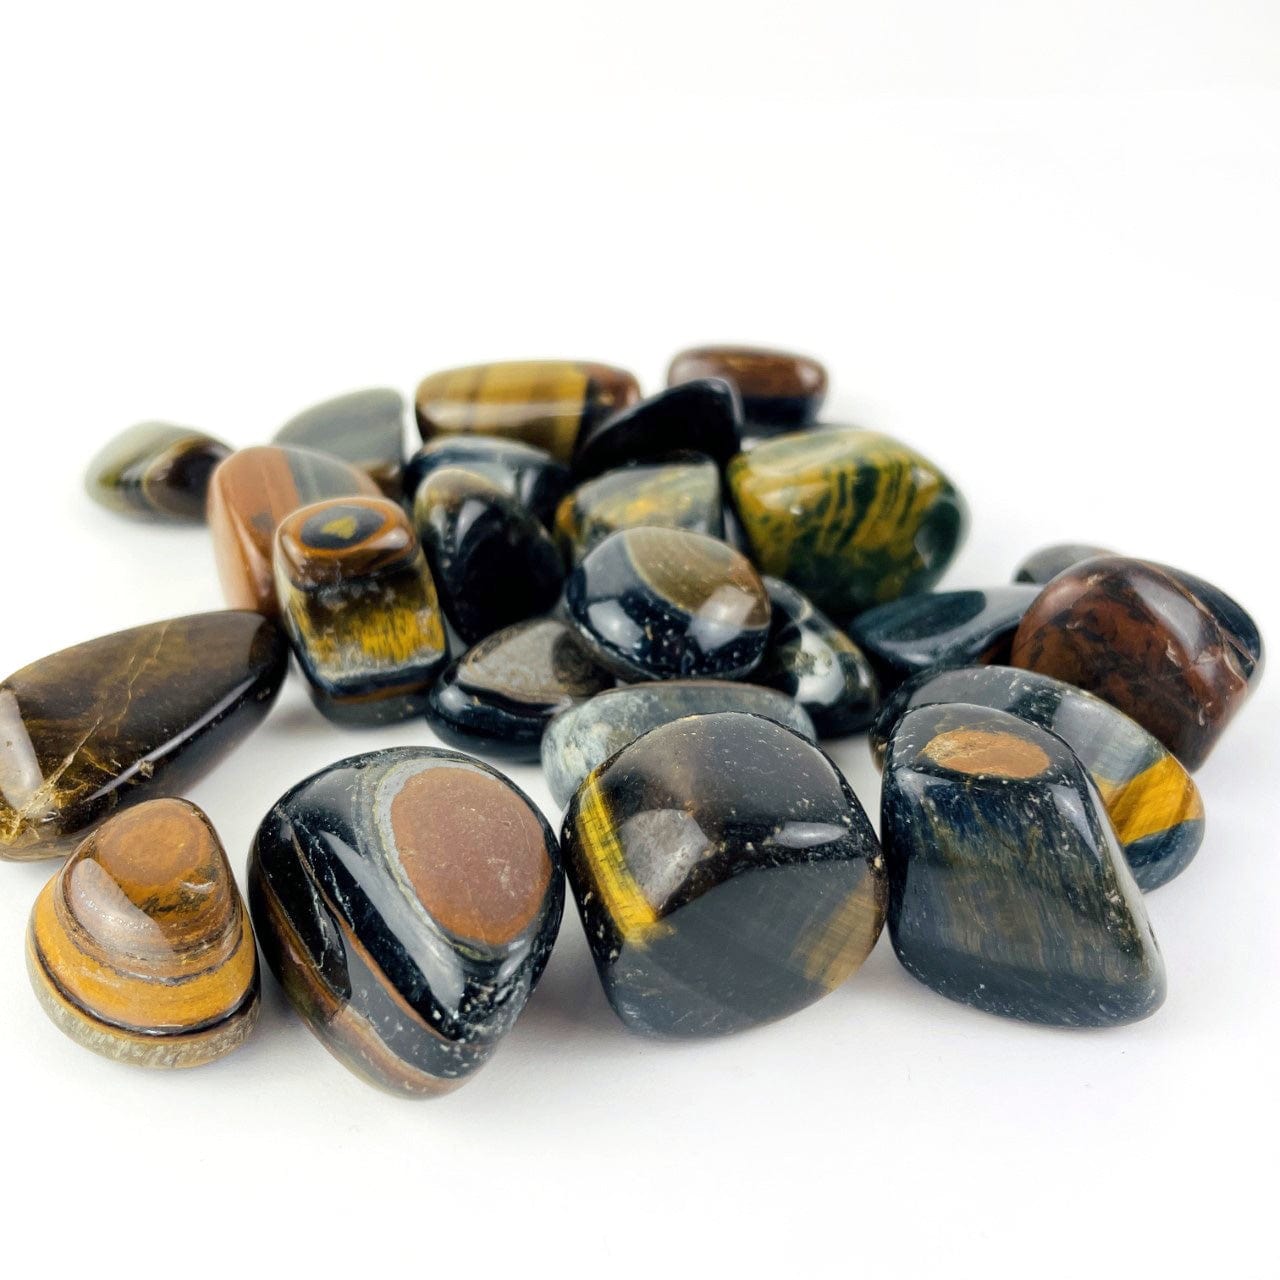 Blue Tigers Eye Polished Stones  from a side view